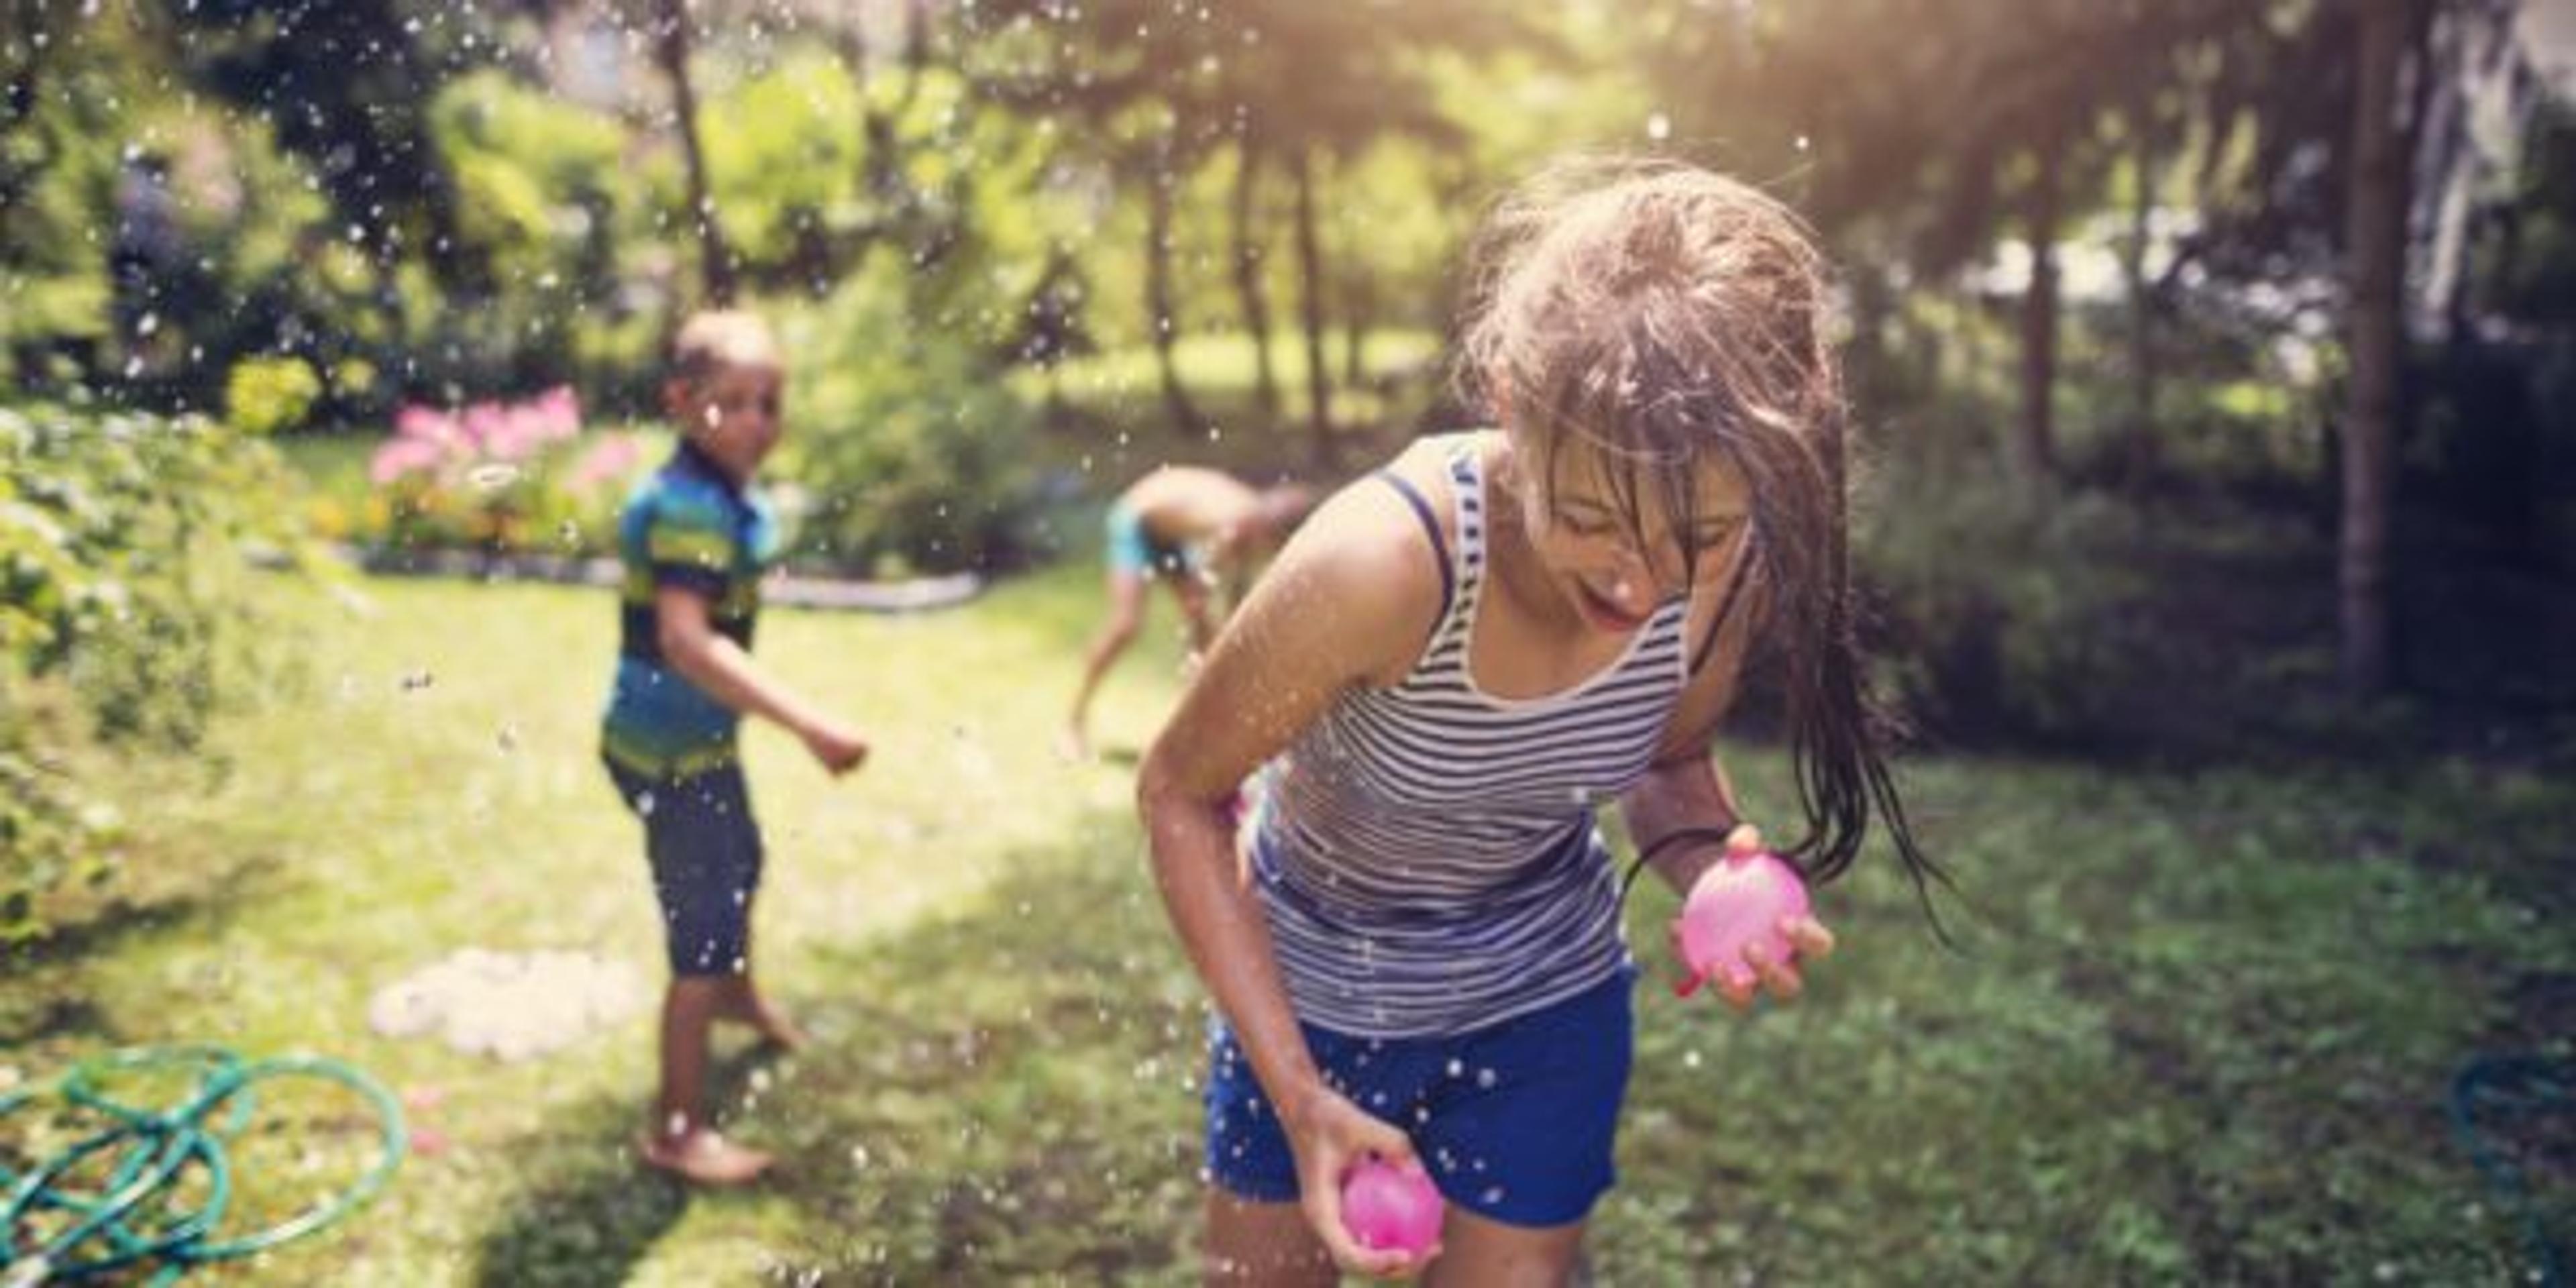 The National Weather Service (NWS) states that a heat index at or above 90 degrees Fahrenheit poses a significant health risk to children.  